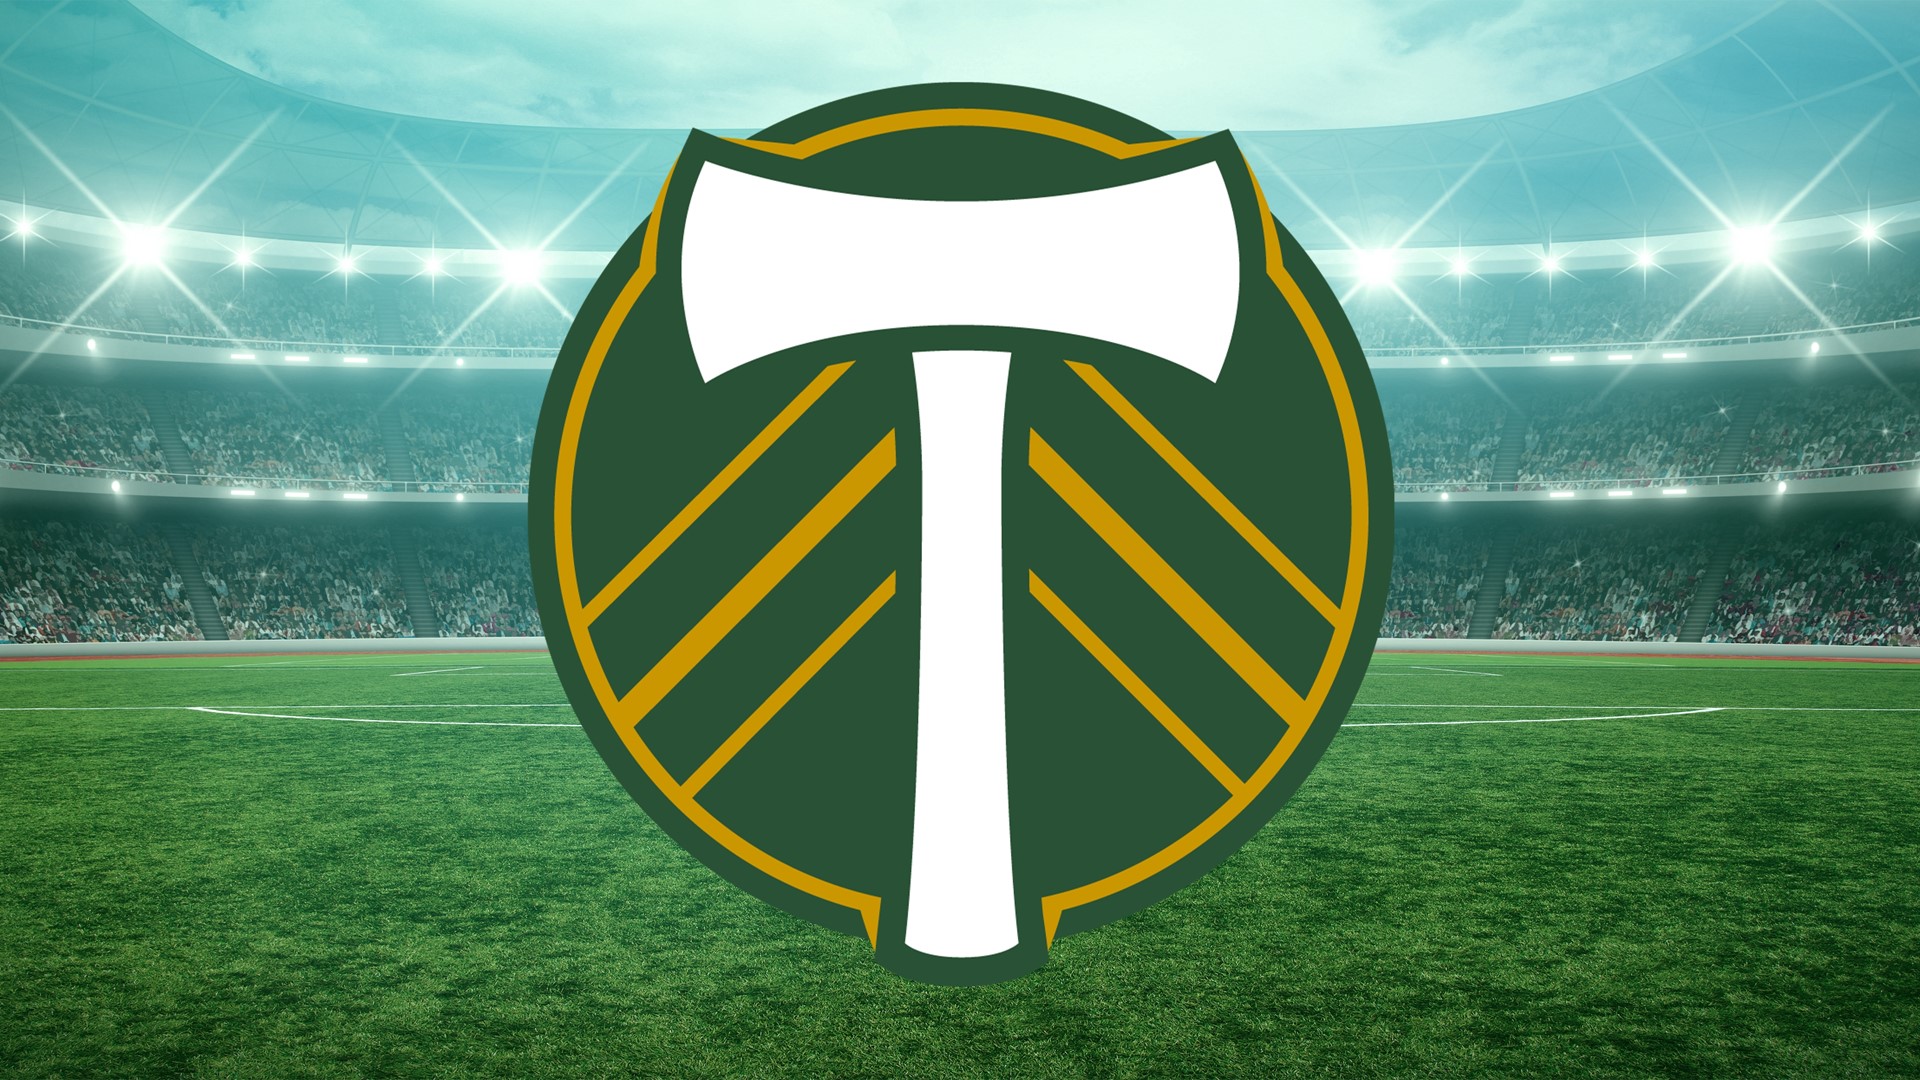 The latest Portland Timbers news, behind-the-scenes footage, highlights, exclusive interviews and more. Host: Apple TV's MLS Season Pass broadcaster Jake Zivin.